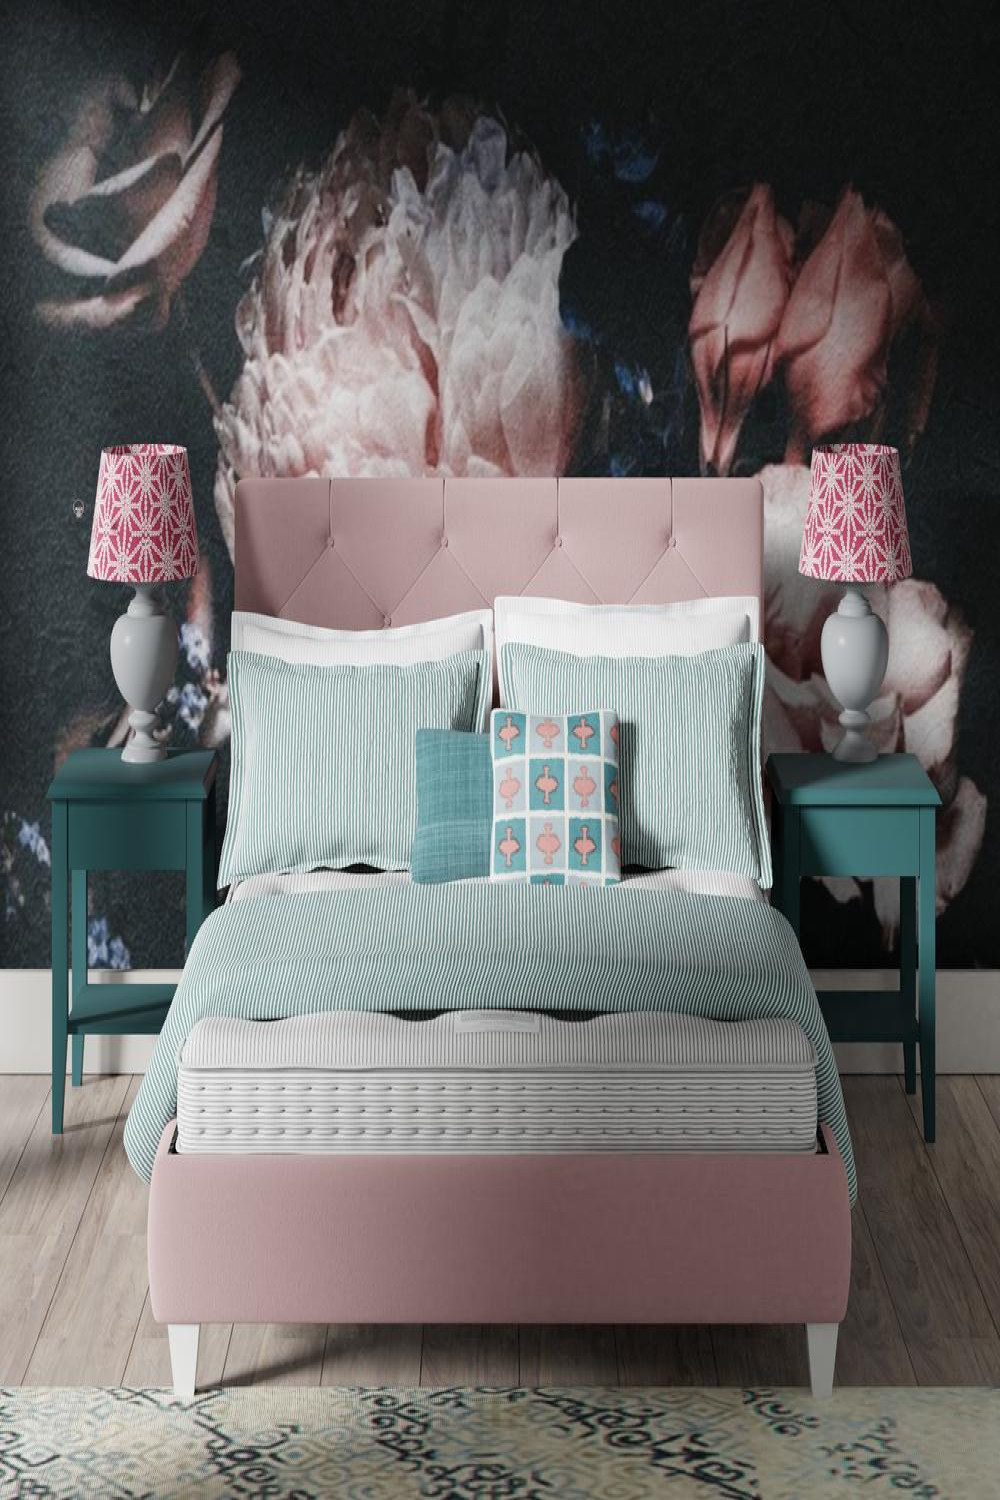 Blue and Pink Bedroom Ideas  Original Bed Co